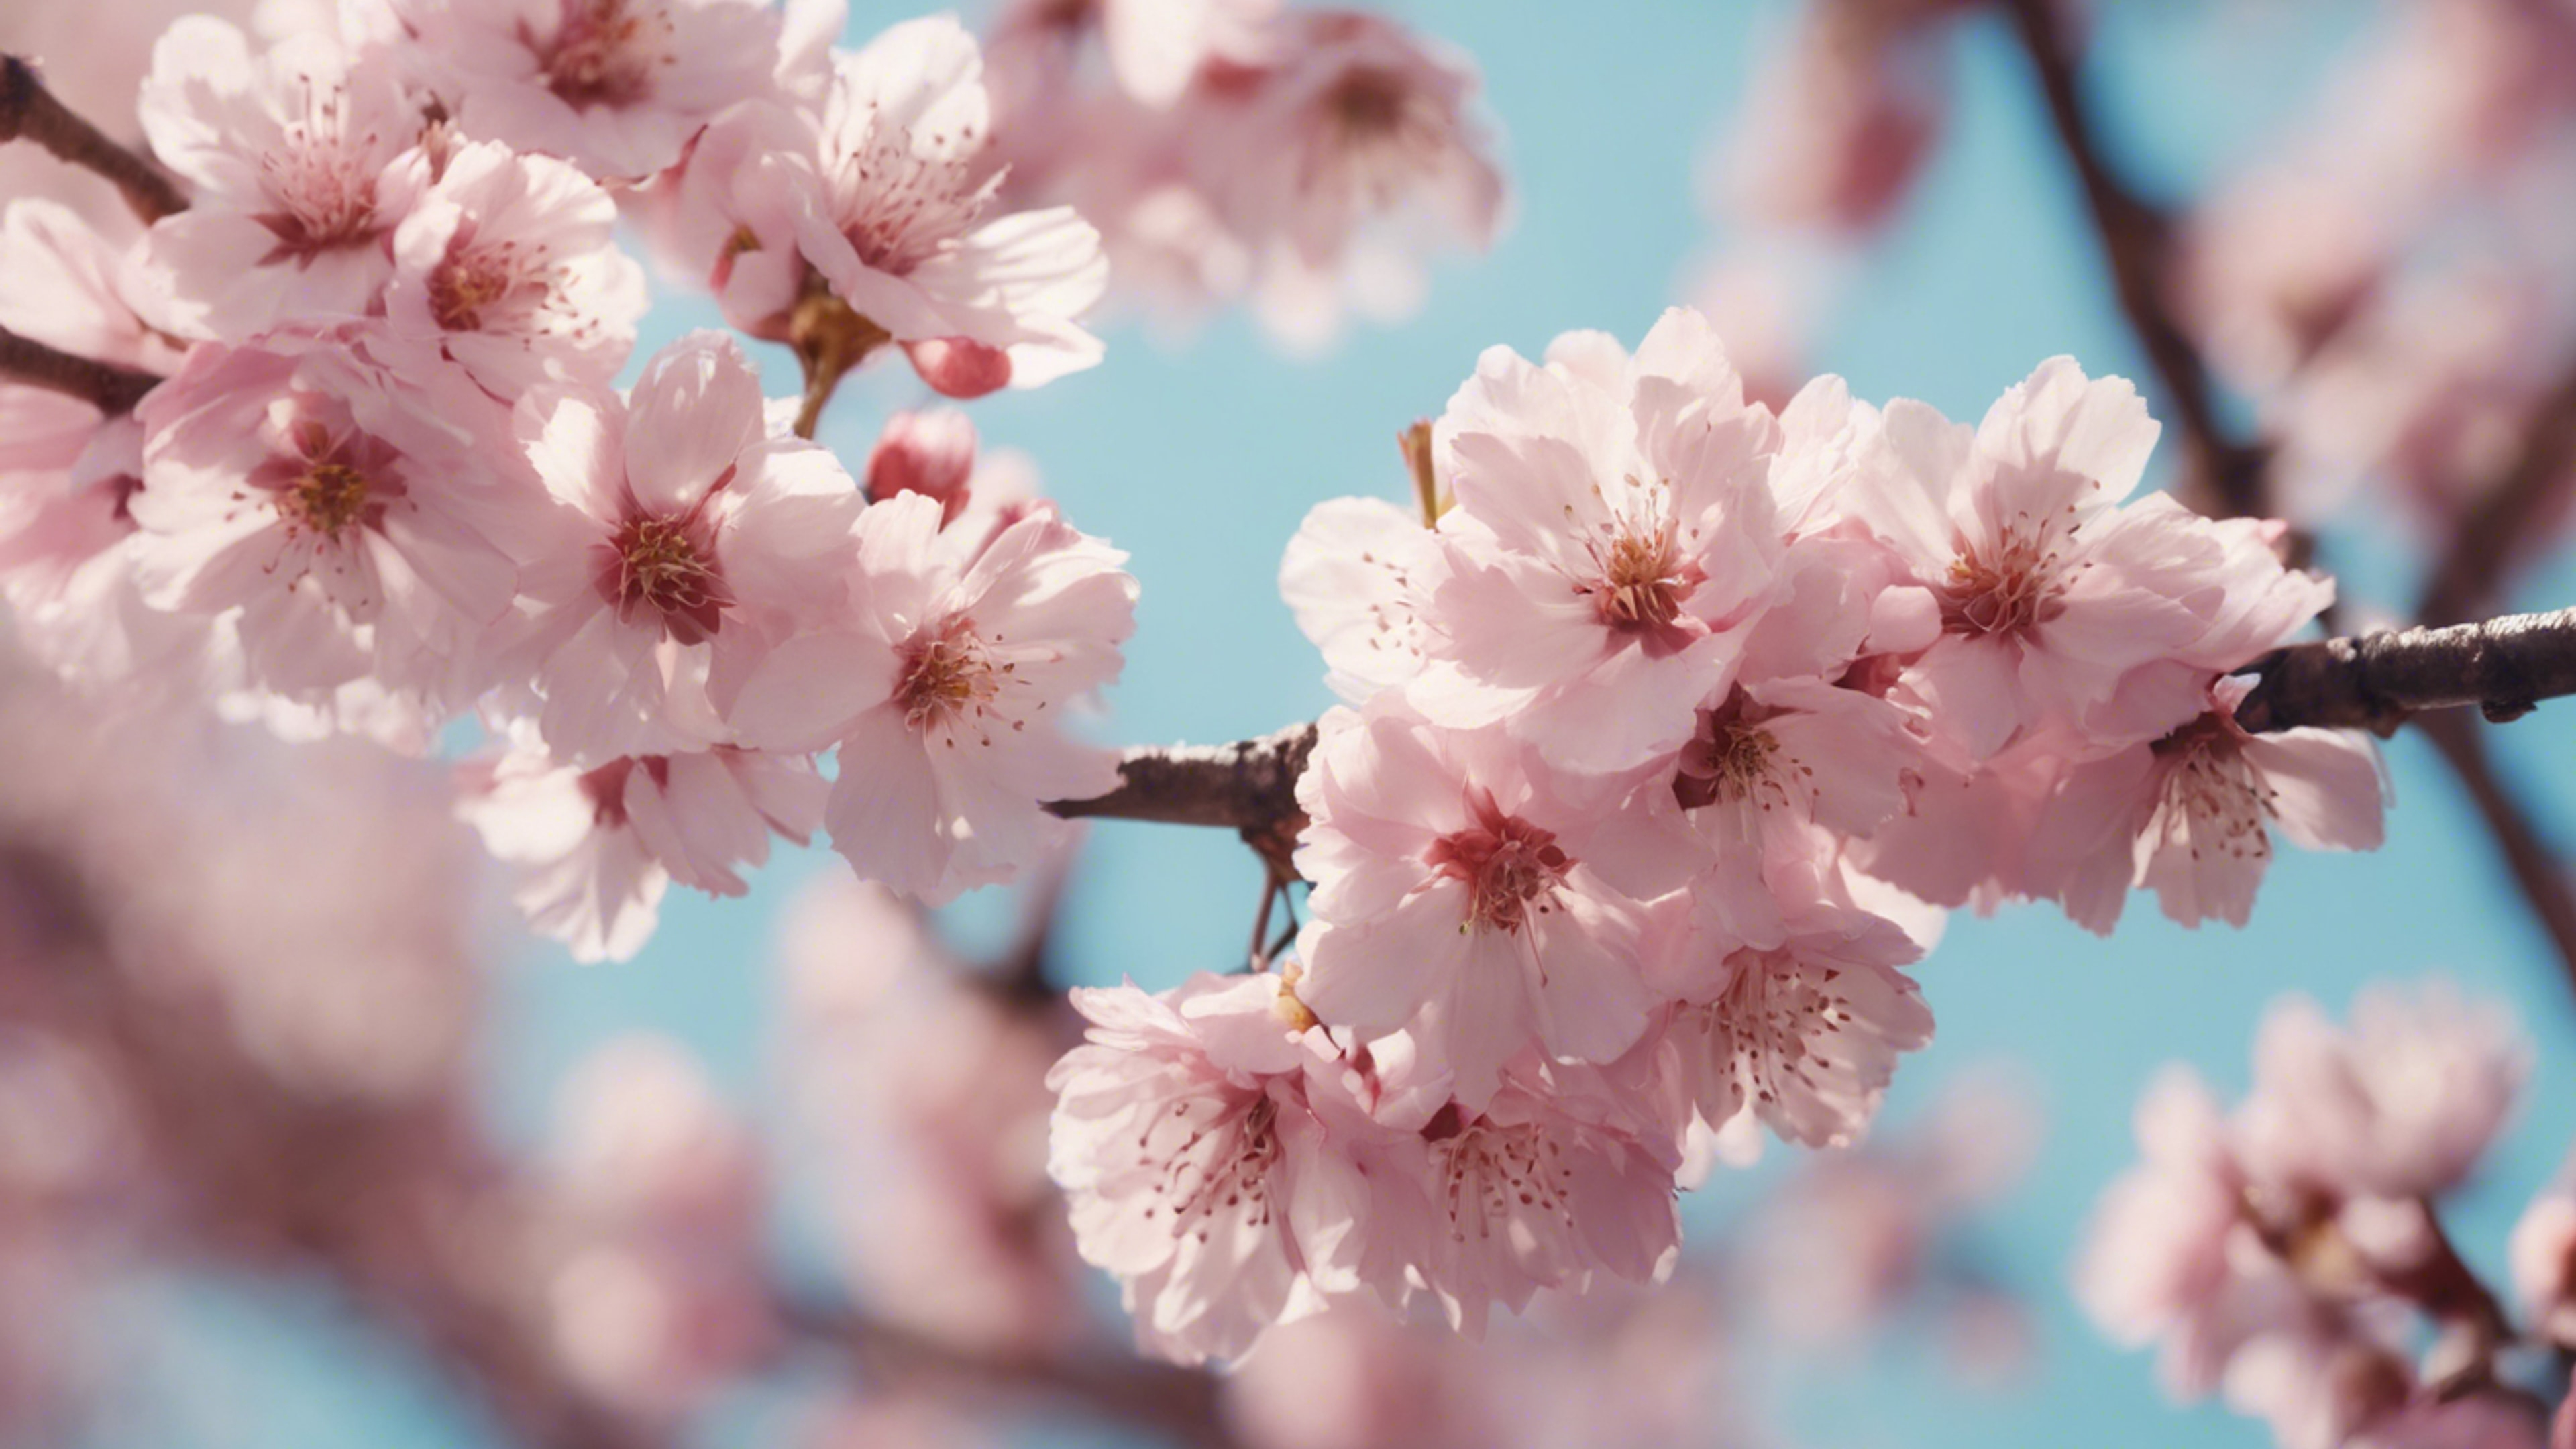 A vibrant scene of pastel pink cherry blossoms falling gently. Tapet[c8bce7433f184c22a8f5]